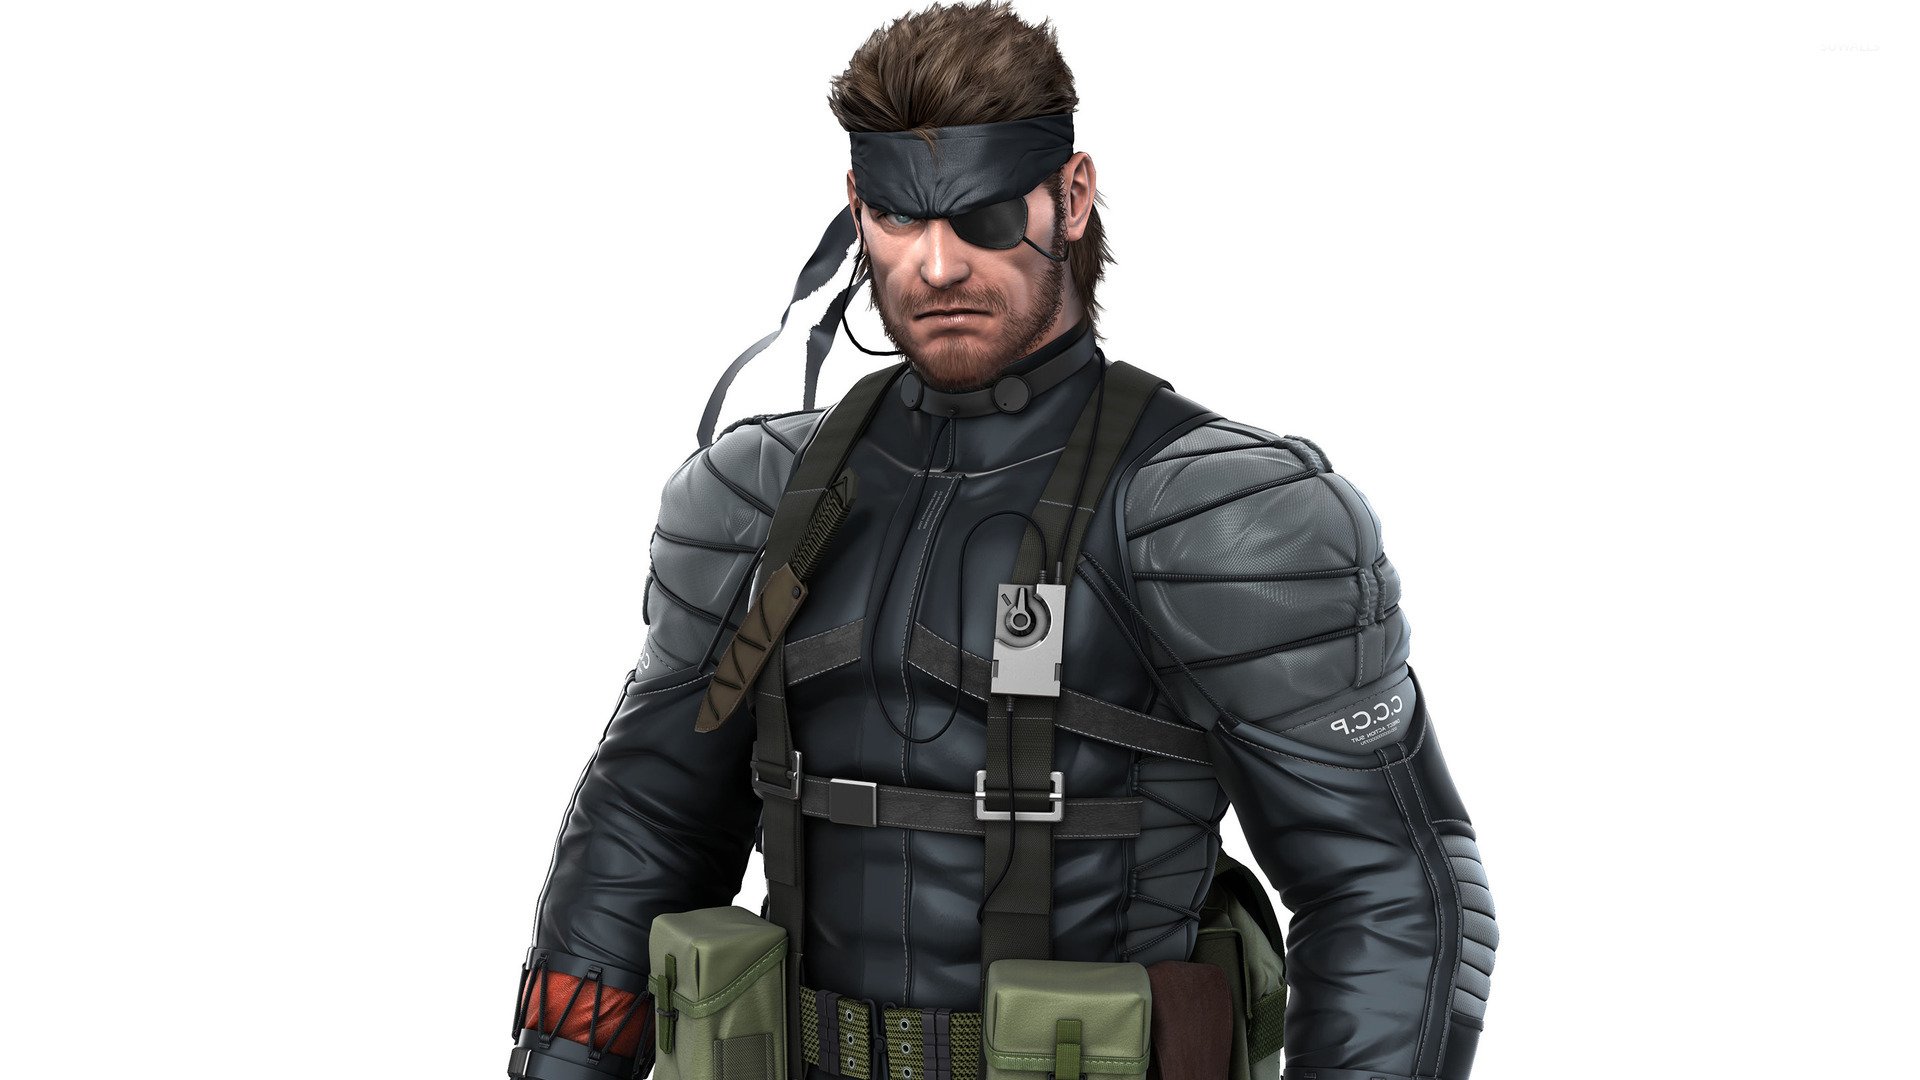 Solid Snake Metal Gear Solid wallpaper Game wallpapers 31388 1920x1080. 